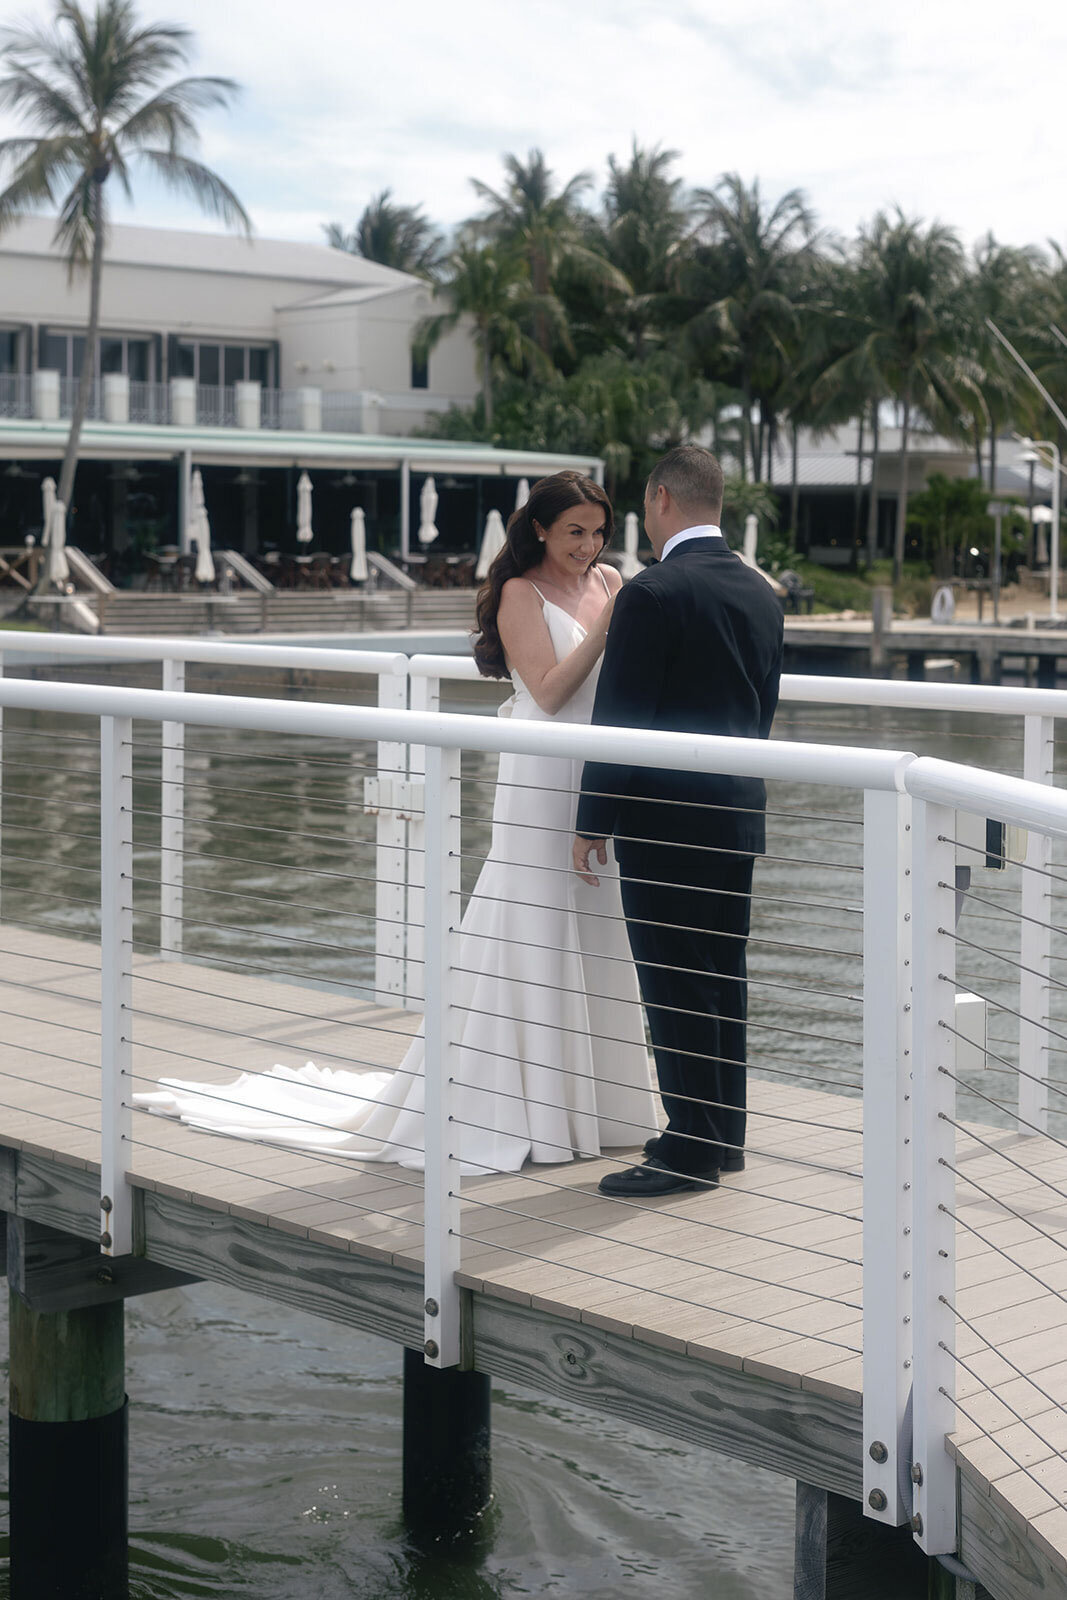 Bride and groom standing on a pier with palm trees in the background